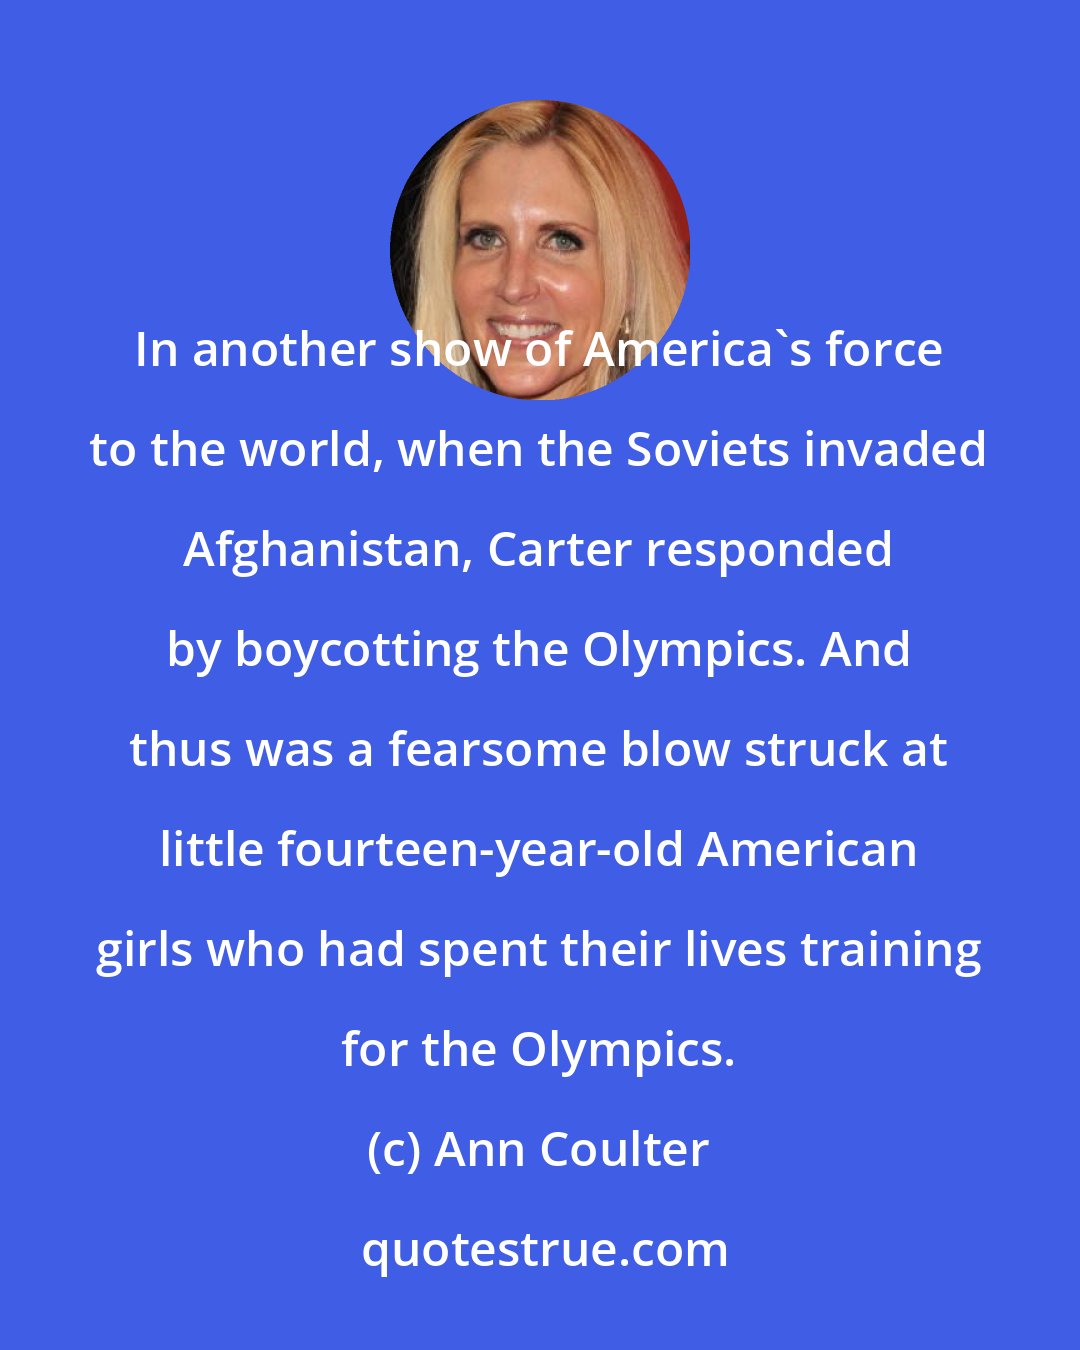 Ann Coulter: In another show of America's force to the world, when the Soviets invaded Afghanistan, Carter responded by boycotting the Olympics. And thus was a fearsome blow struck at little fourteen-year-old American girls who had spent their lives training for the Olympics.